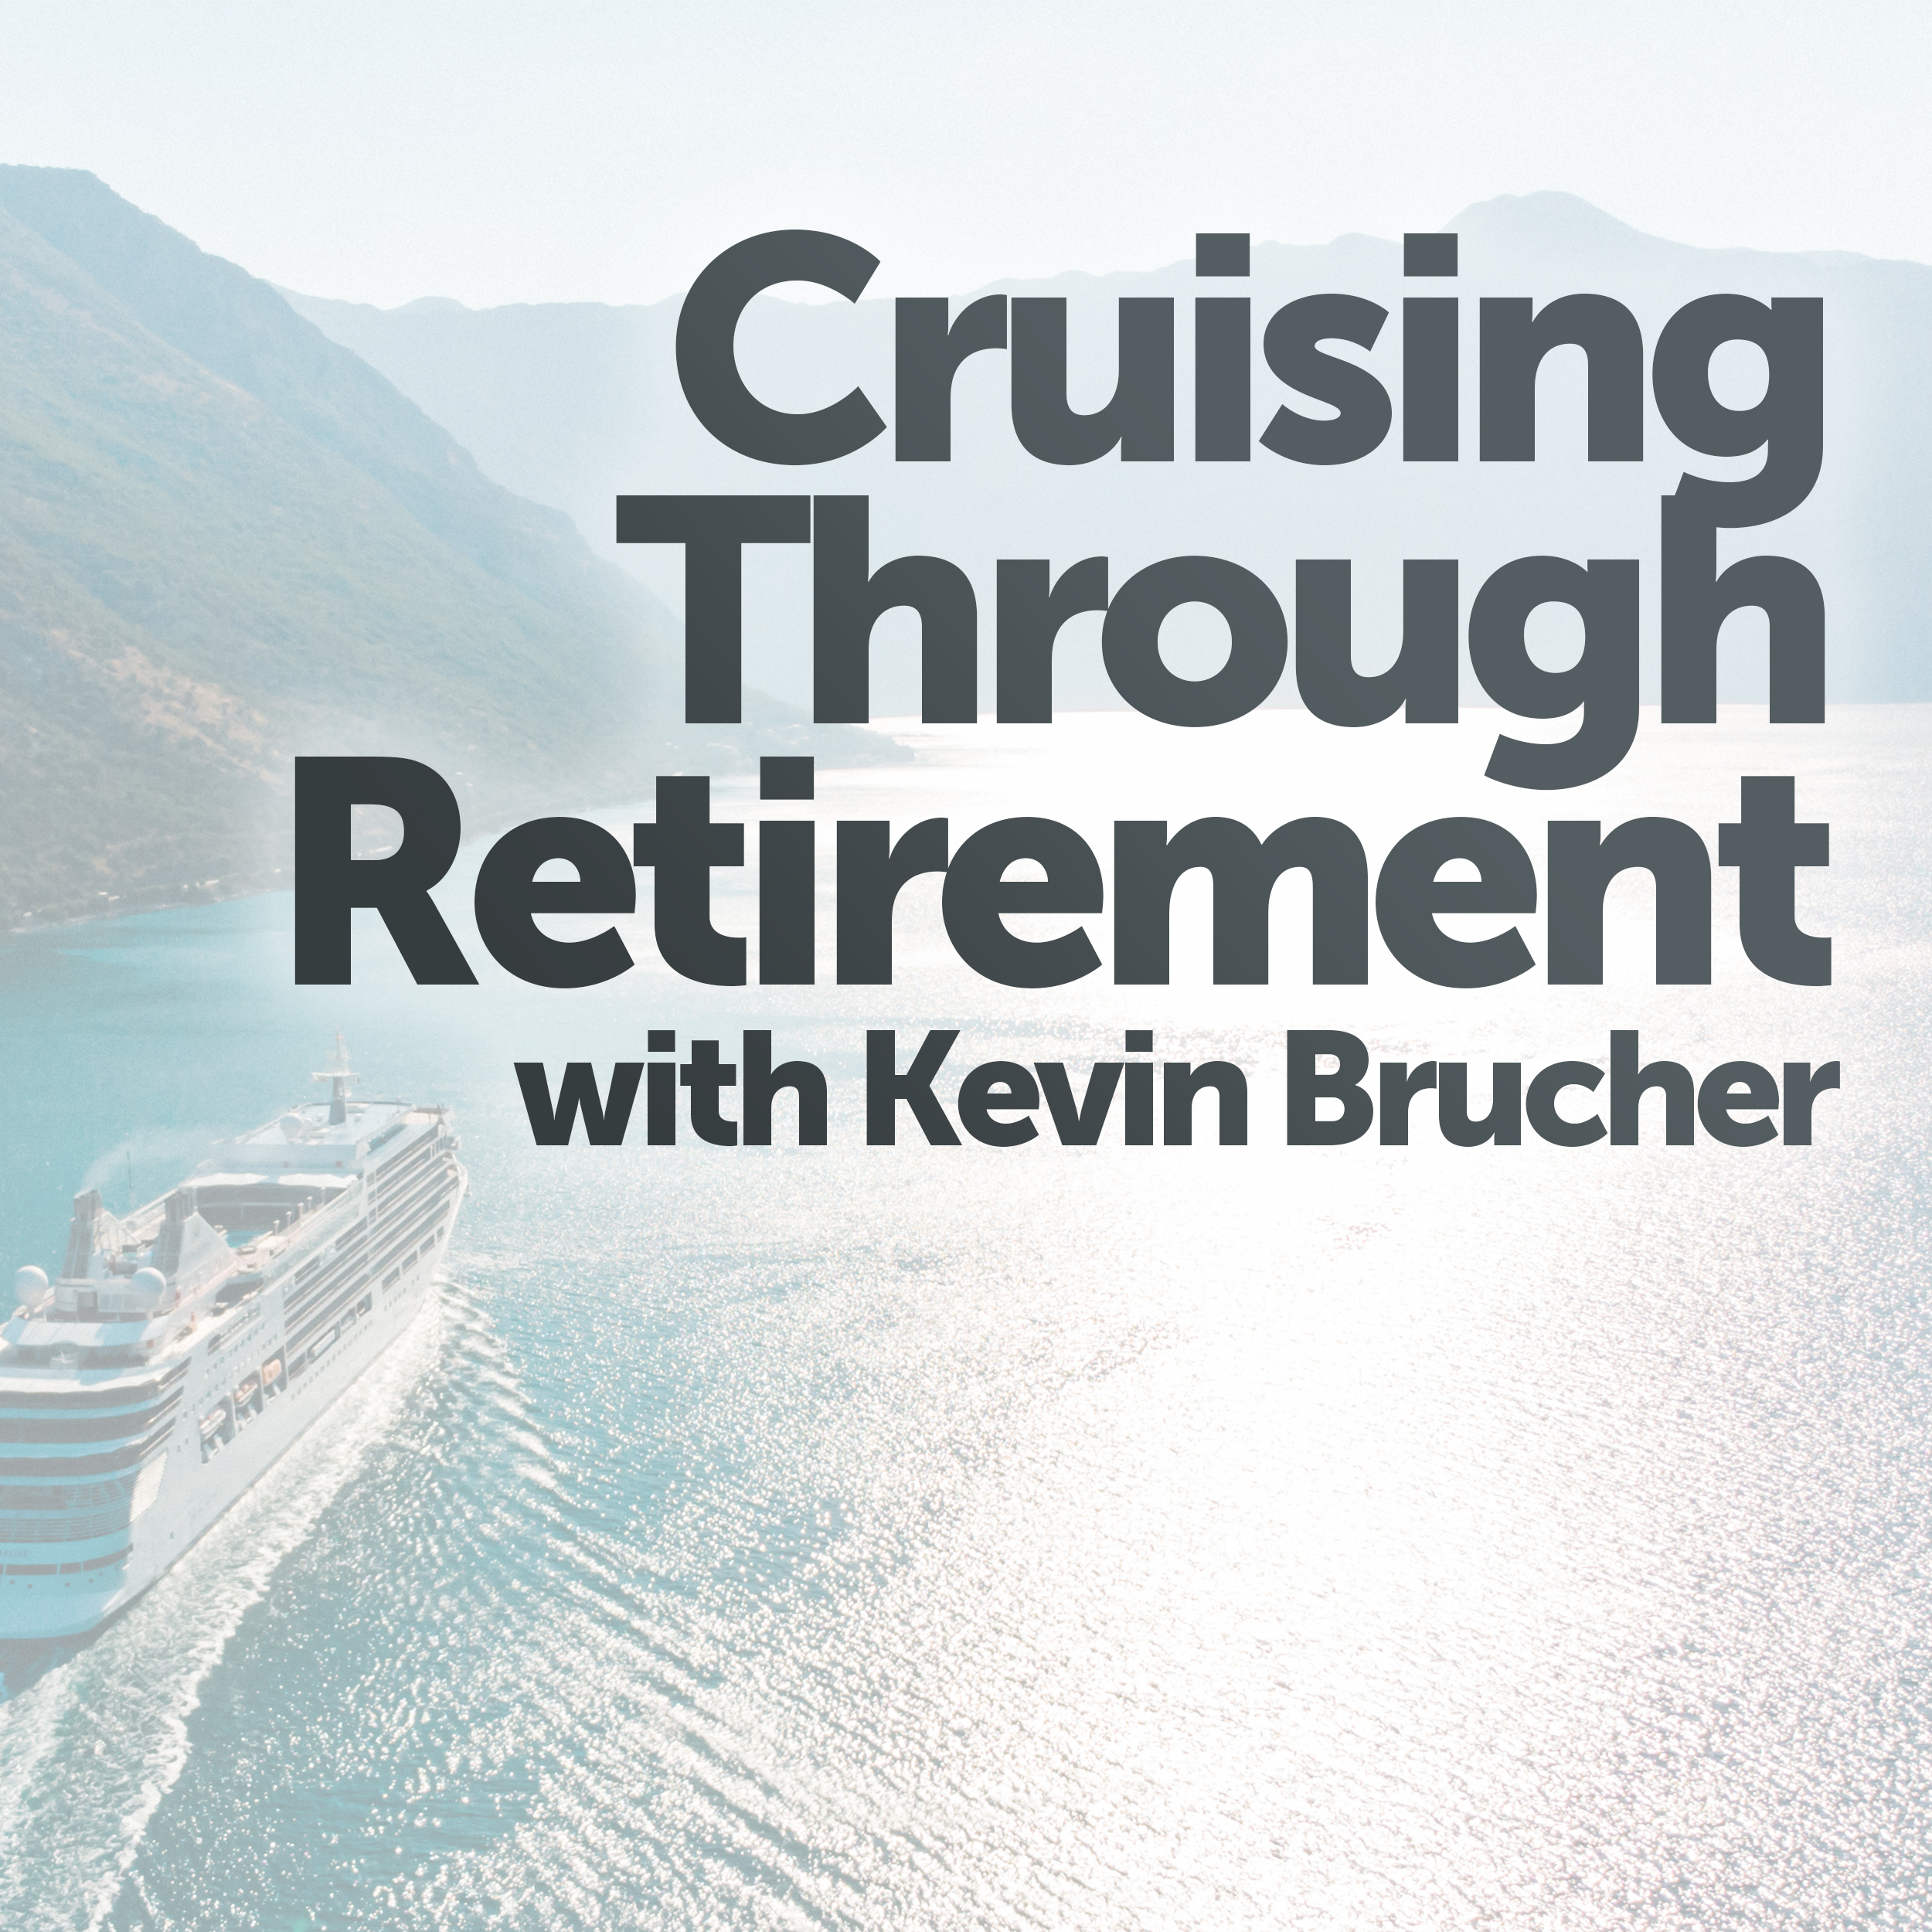 Kevin Burcher and Steve Sedahl discuss the evolution of Social Security and the importance of understanding its history and future changes.